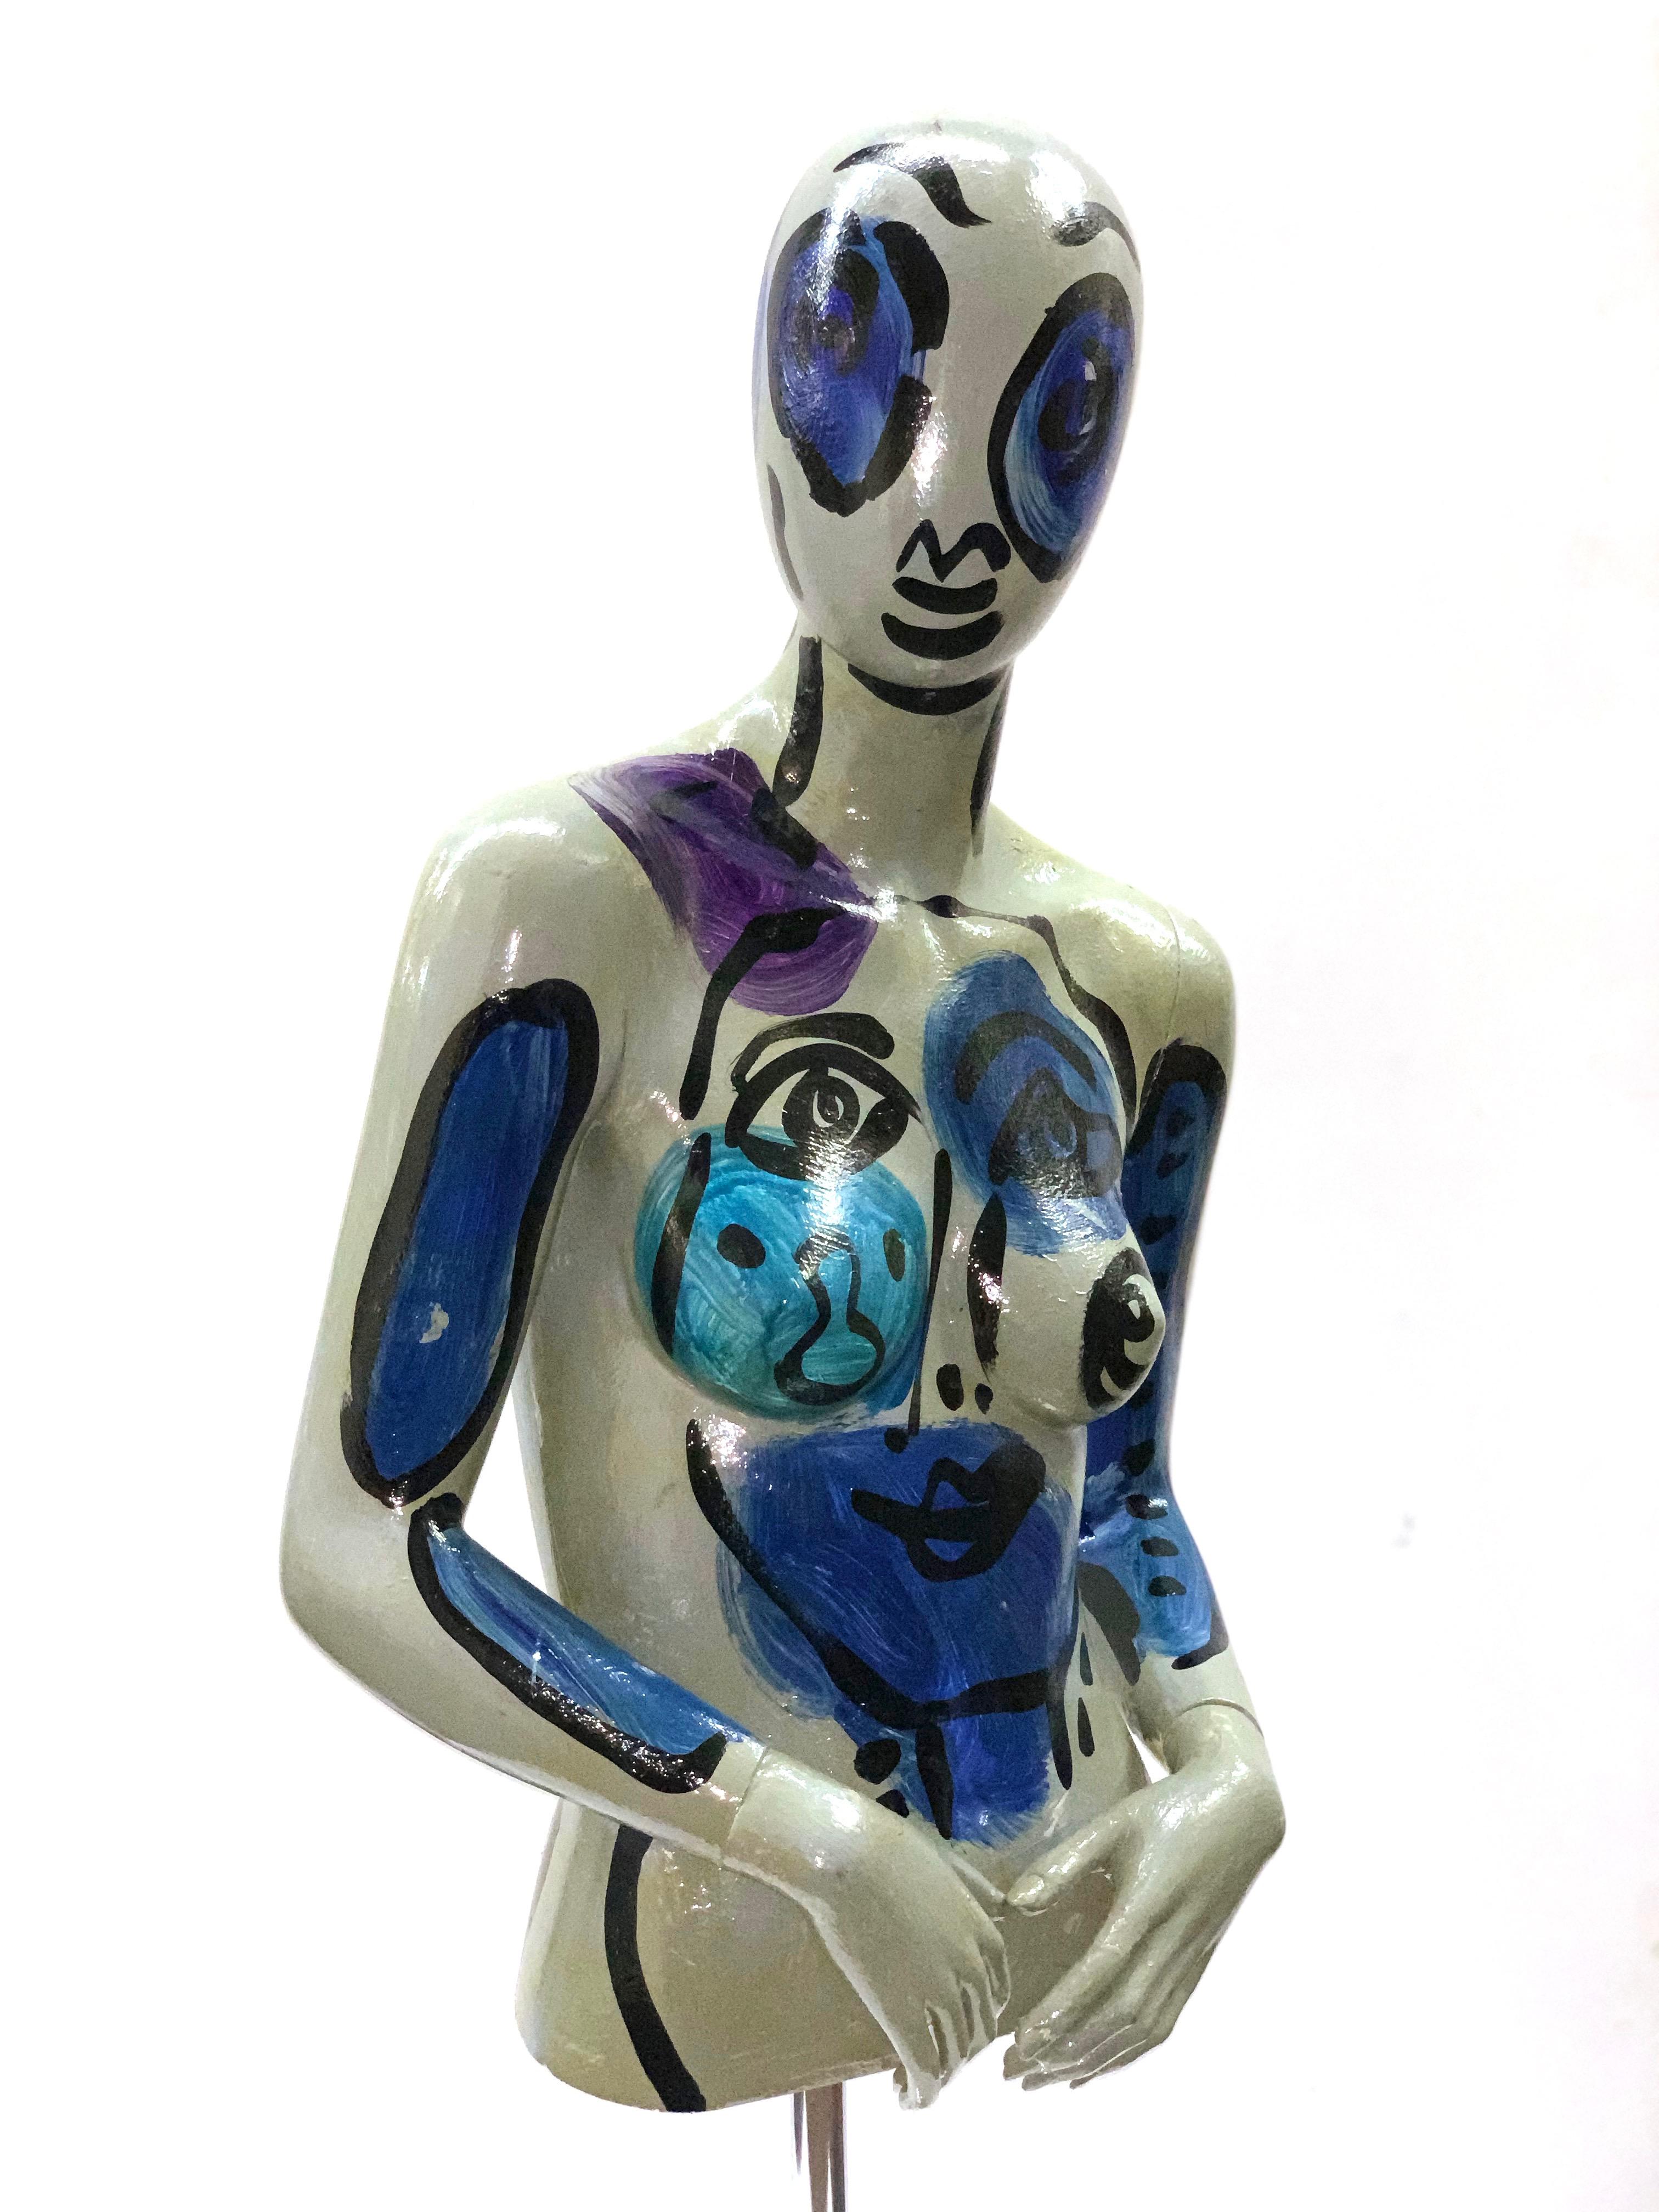 Abstract expressionist painted upper body of a mannequin by Peter Keil, painted in shades of blue with abstract faces. The piece is signed on the left side bottom, was likely made in the 1980s and is in great vintage condition with some